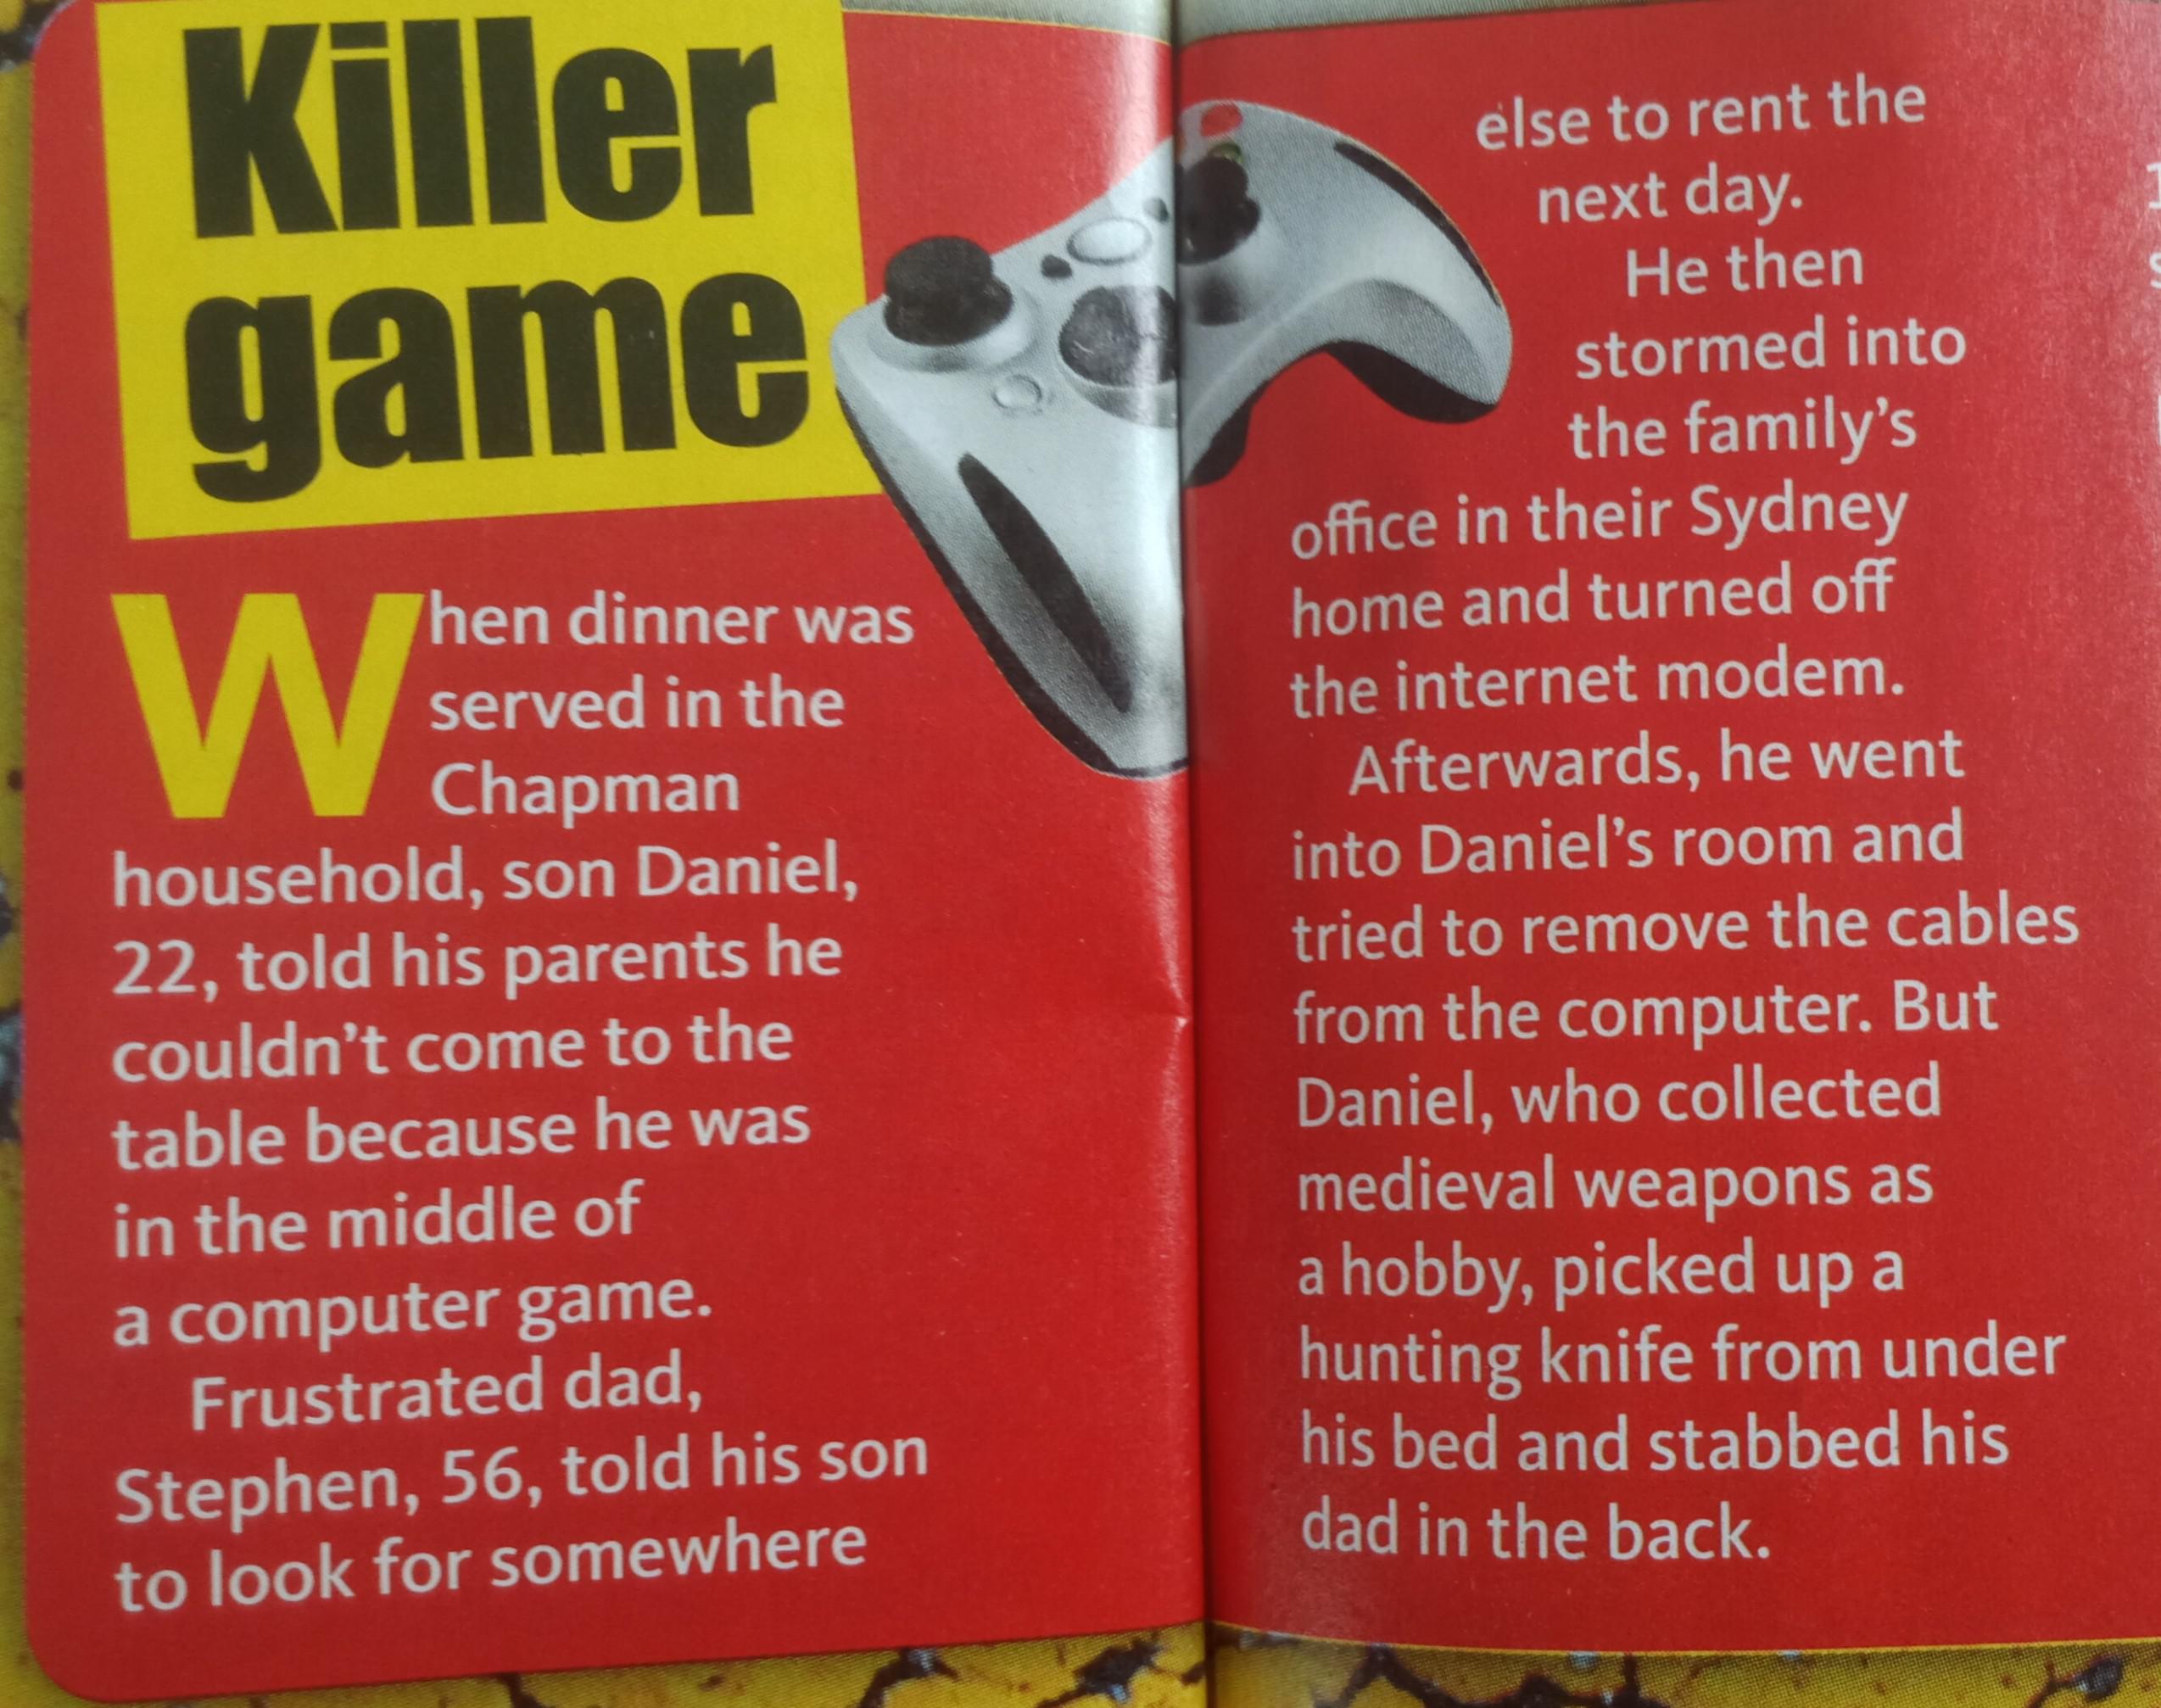 poster - Killer game Then dinner was served in the Chapman household, son Daniel, 22, told his parents he couldn't come to the table because he was in the middle of a computer game. Frustrated dad, Stephen, 56, told his son to look for somewhere else to r